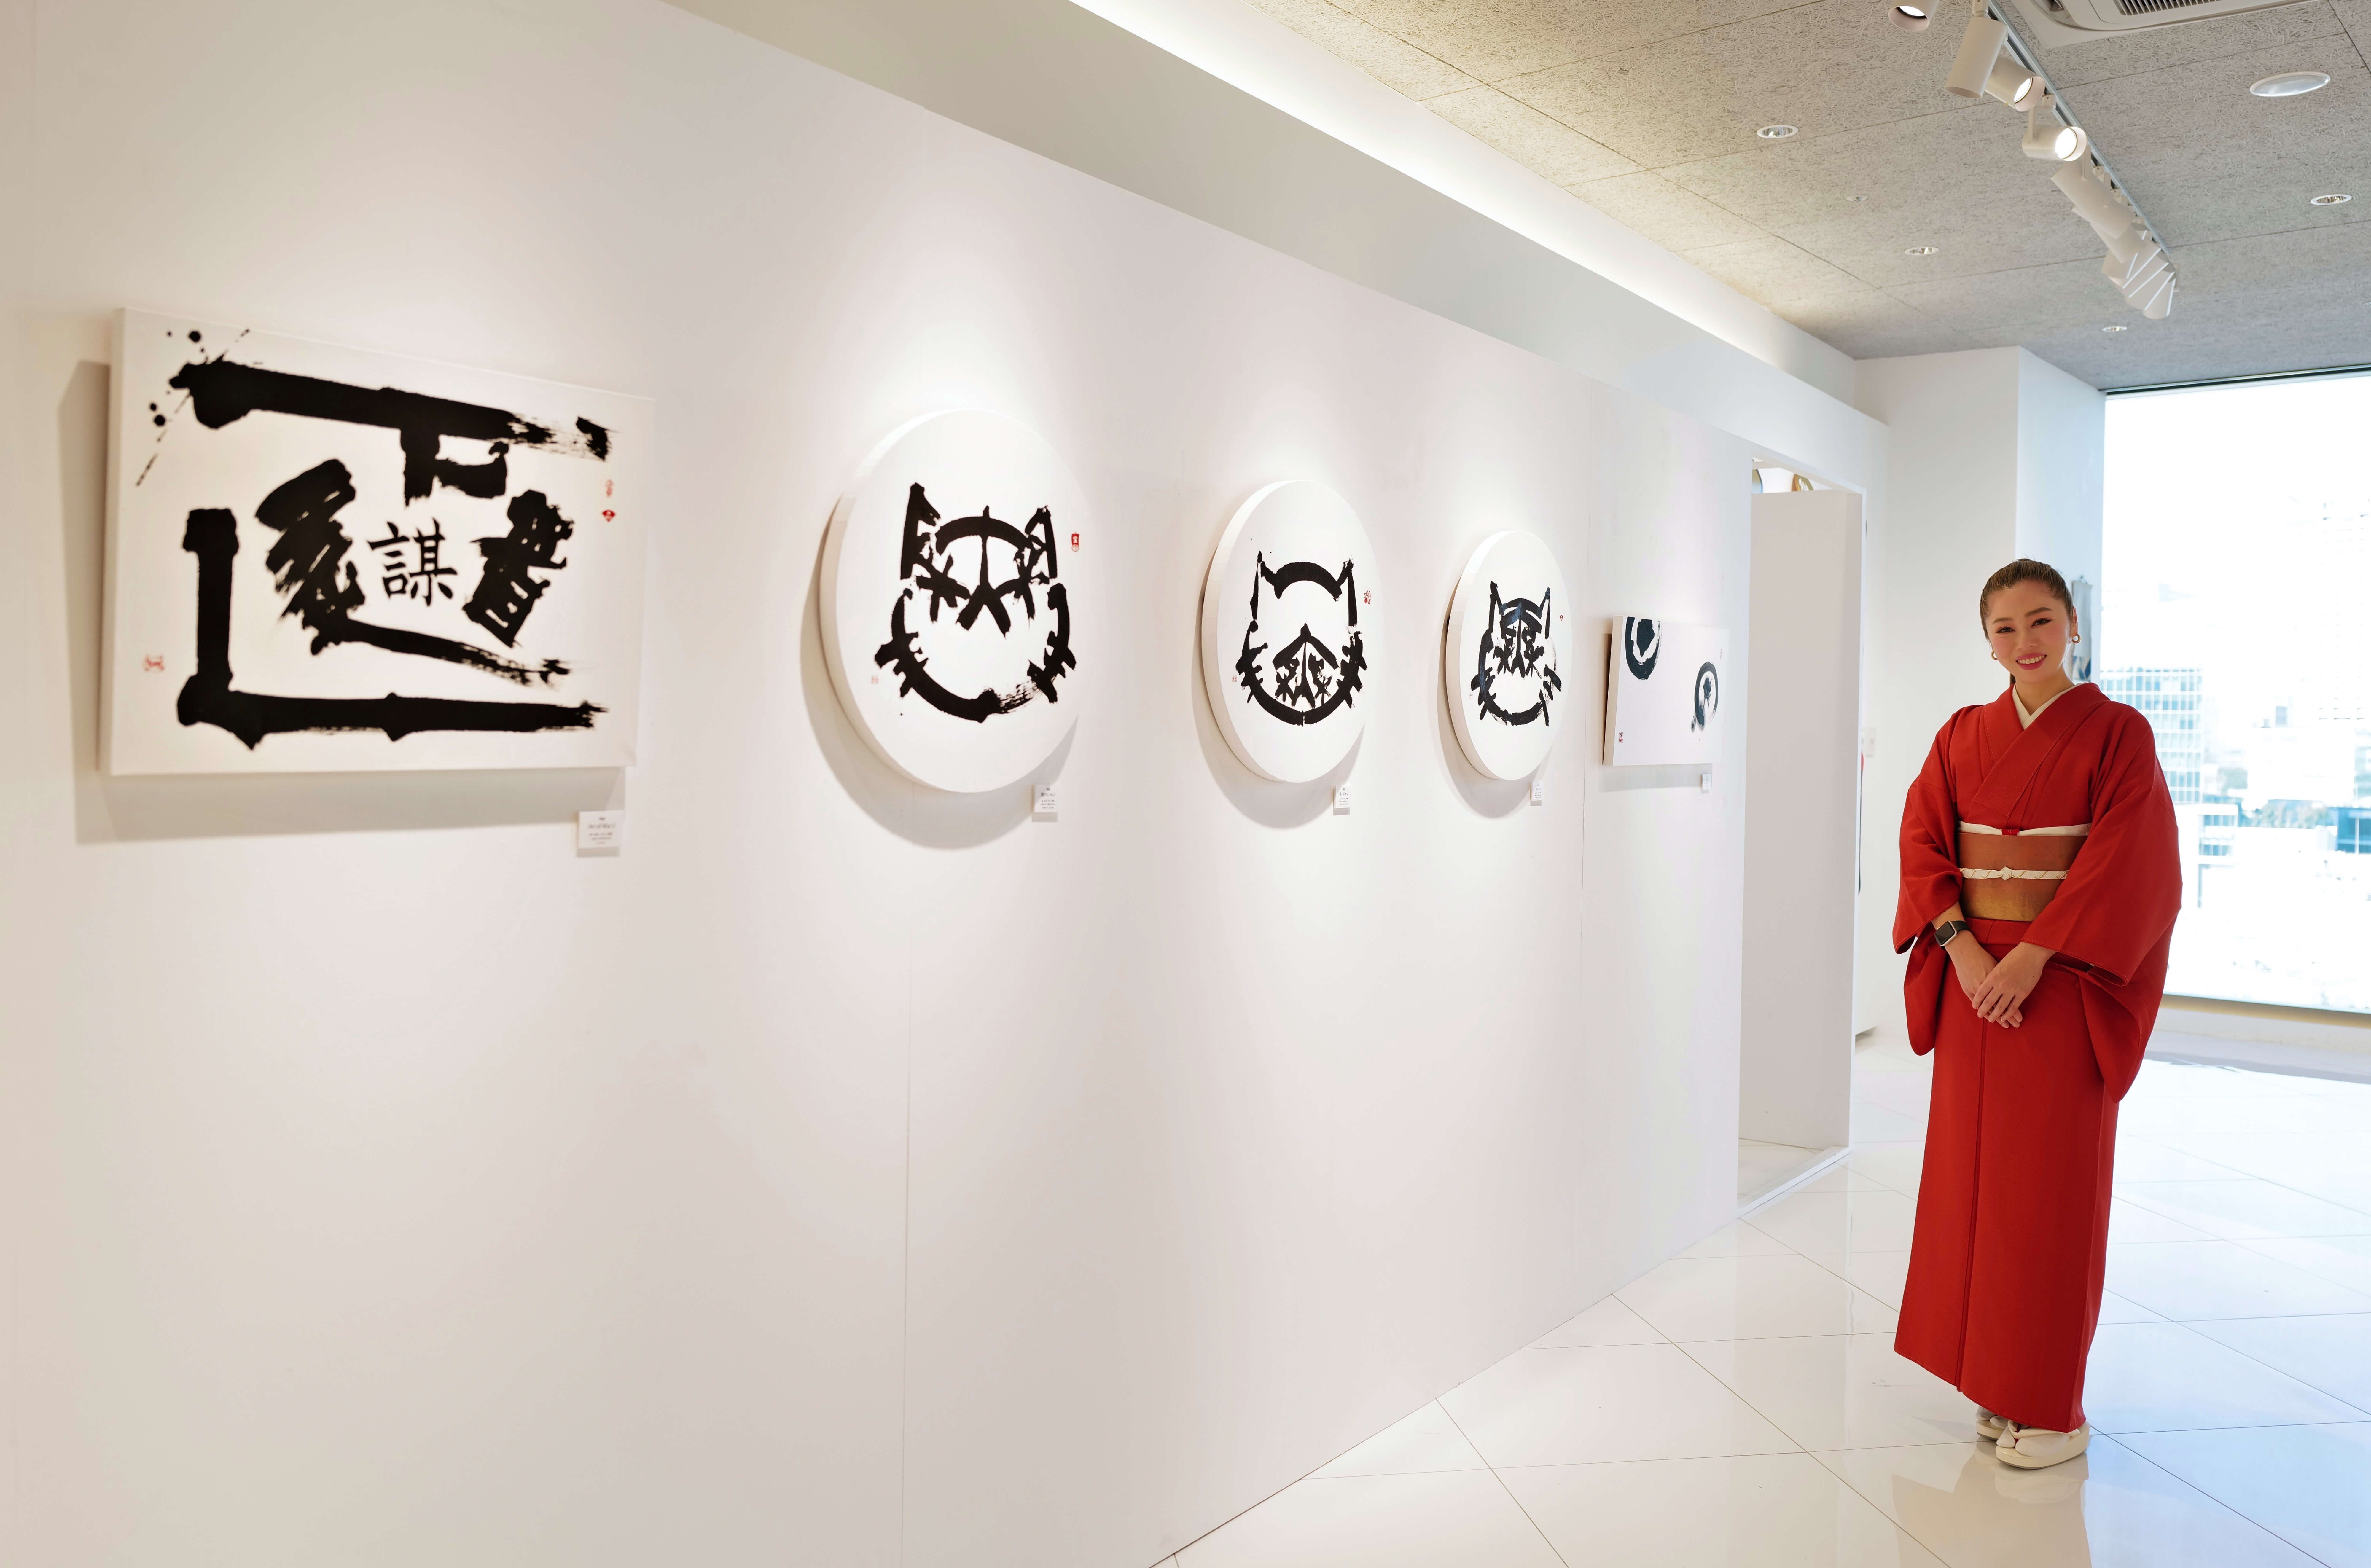 Tesla owner in red kimono standing next to her Japanese calligraphy artwork in a white room